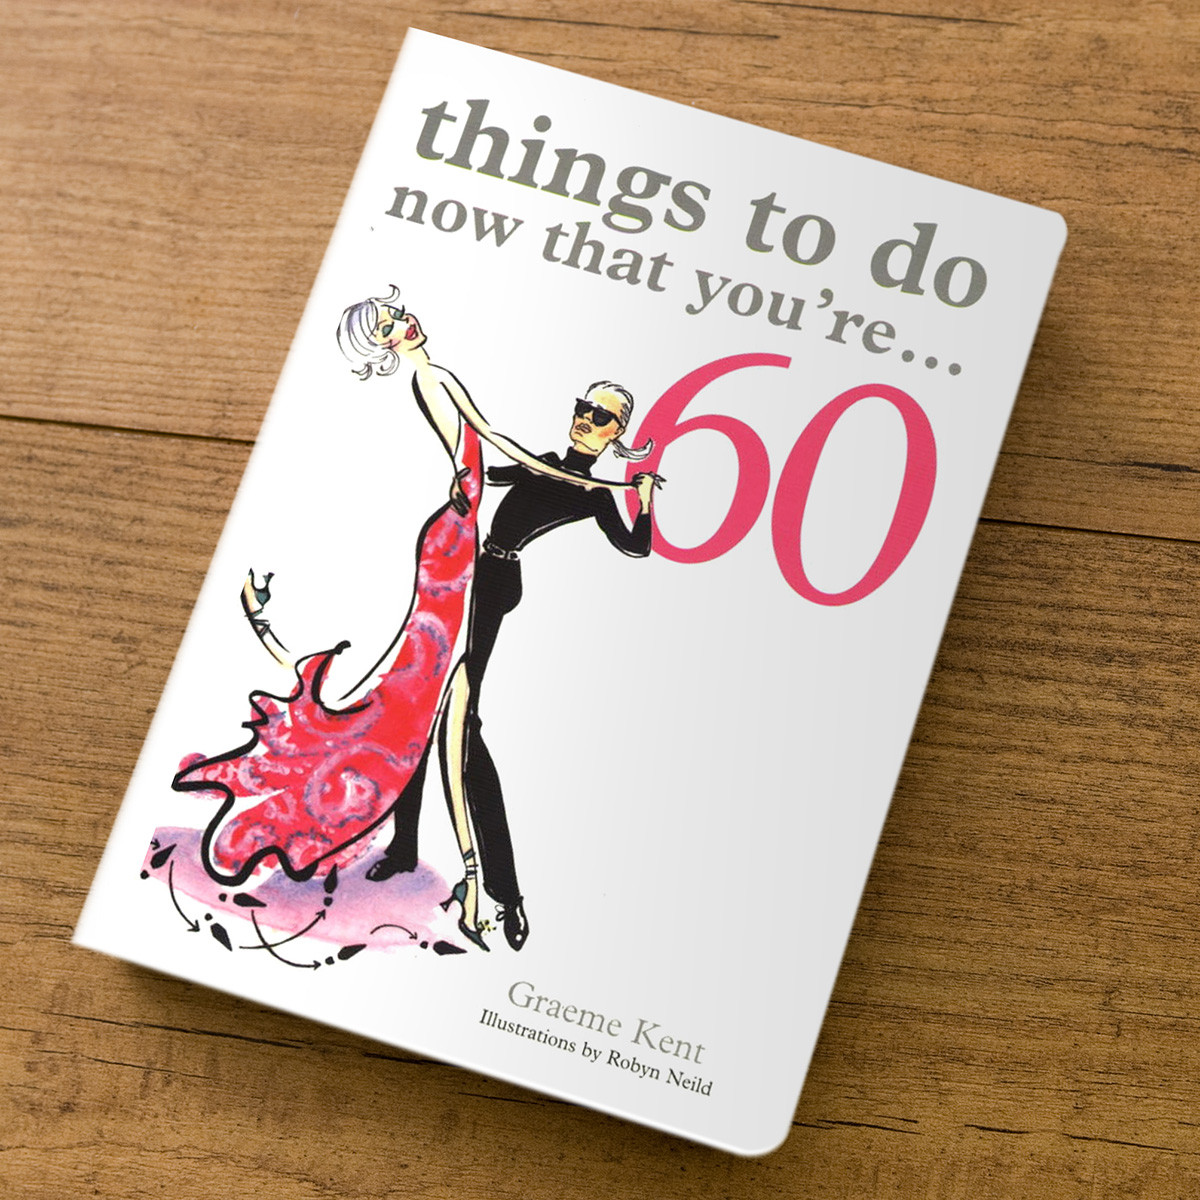 Gift Ideas For 60Th Birthday
 Things To Do Now That You re 60 Gift Book 60th